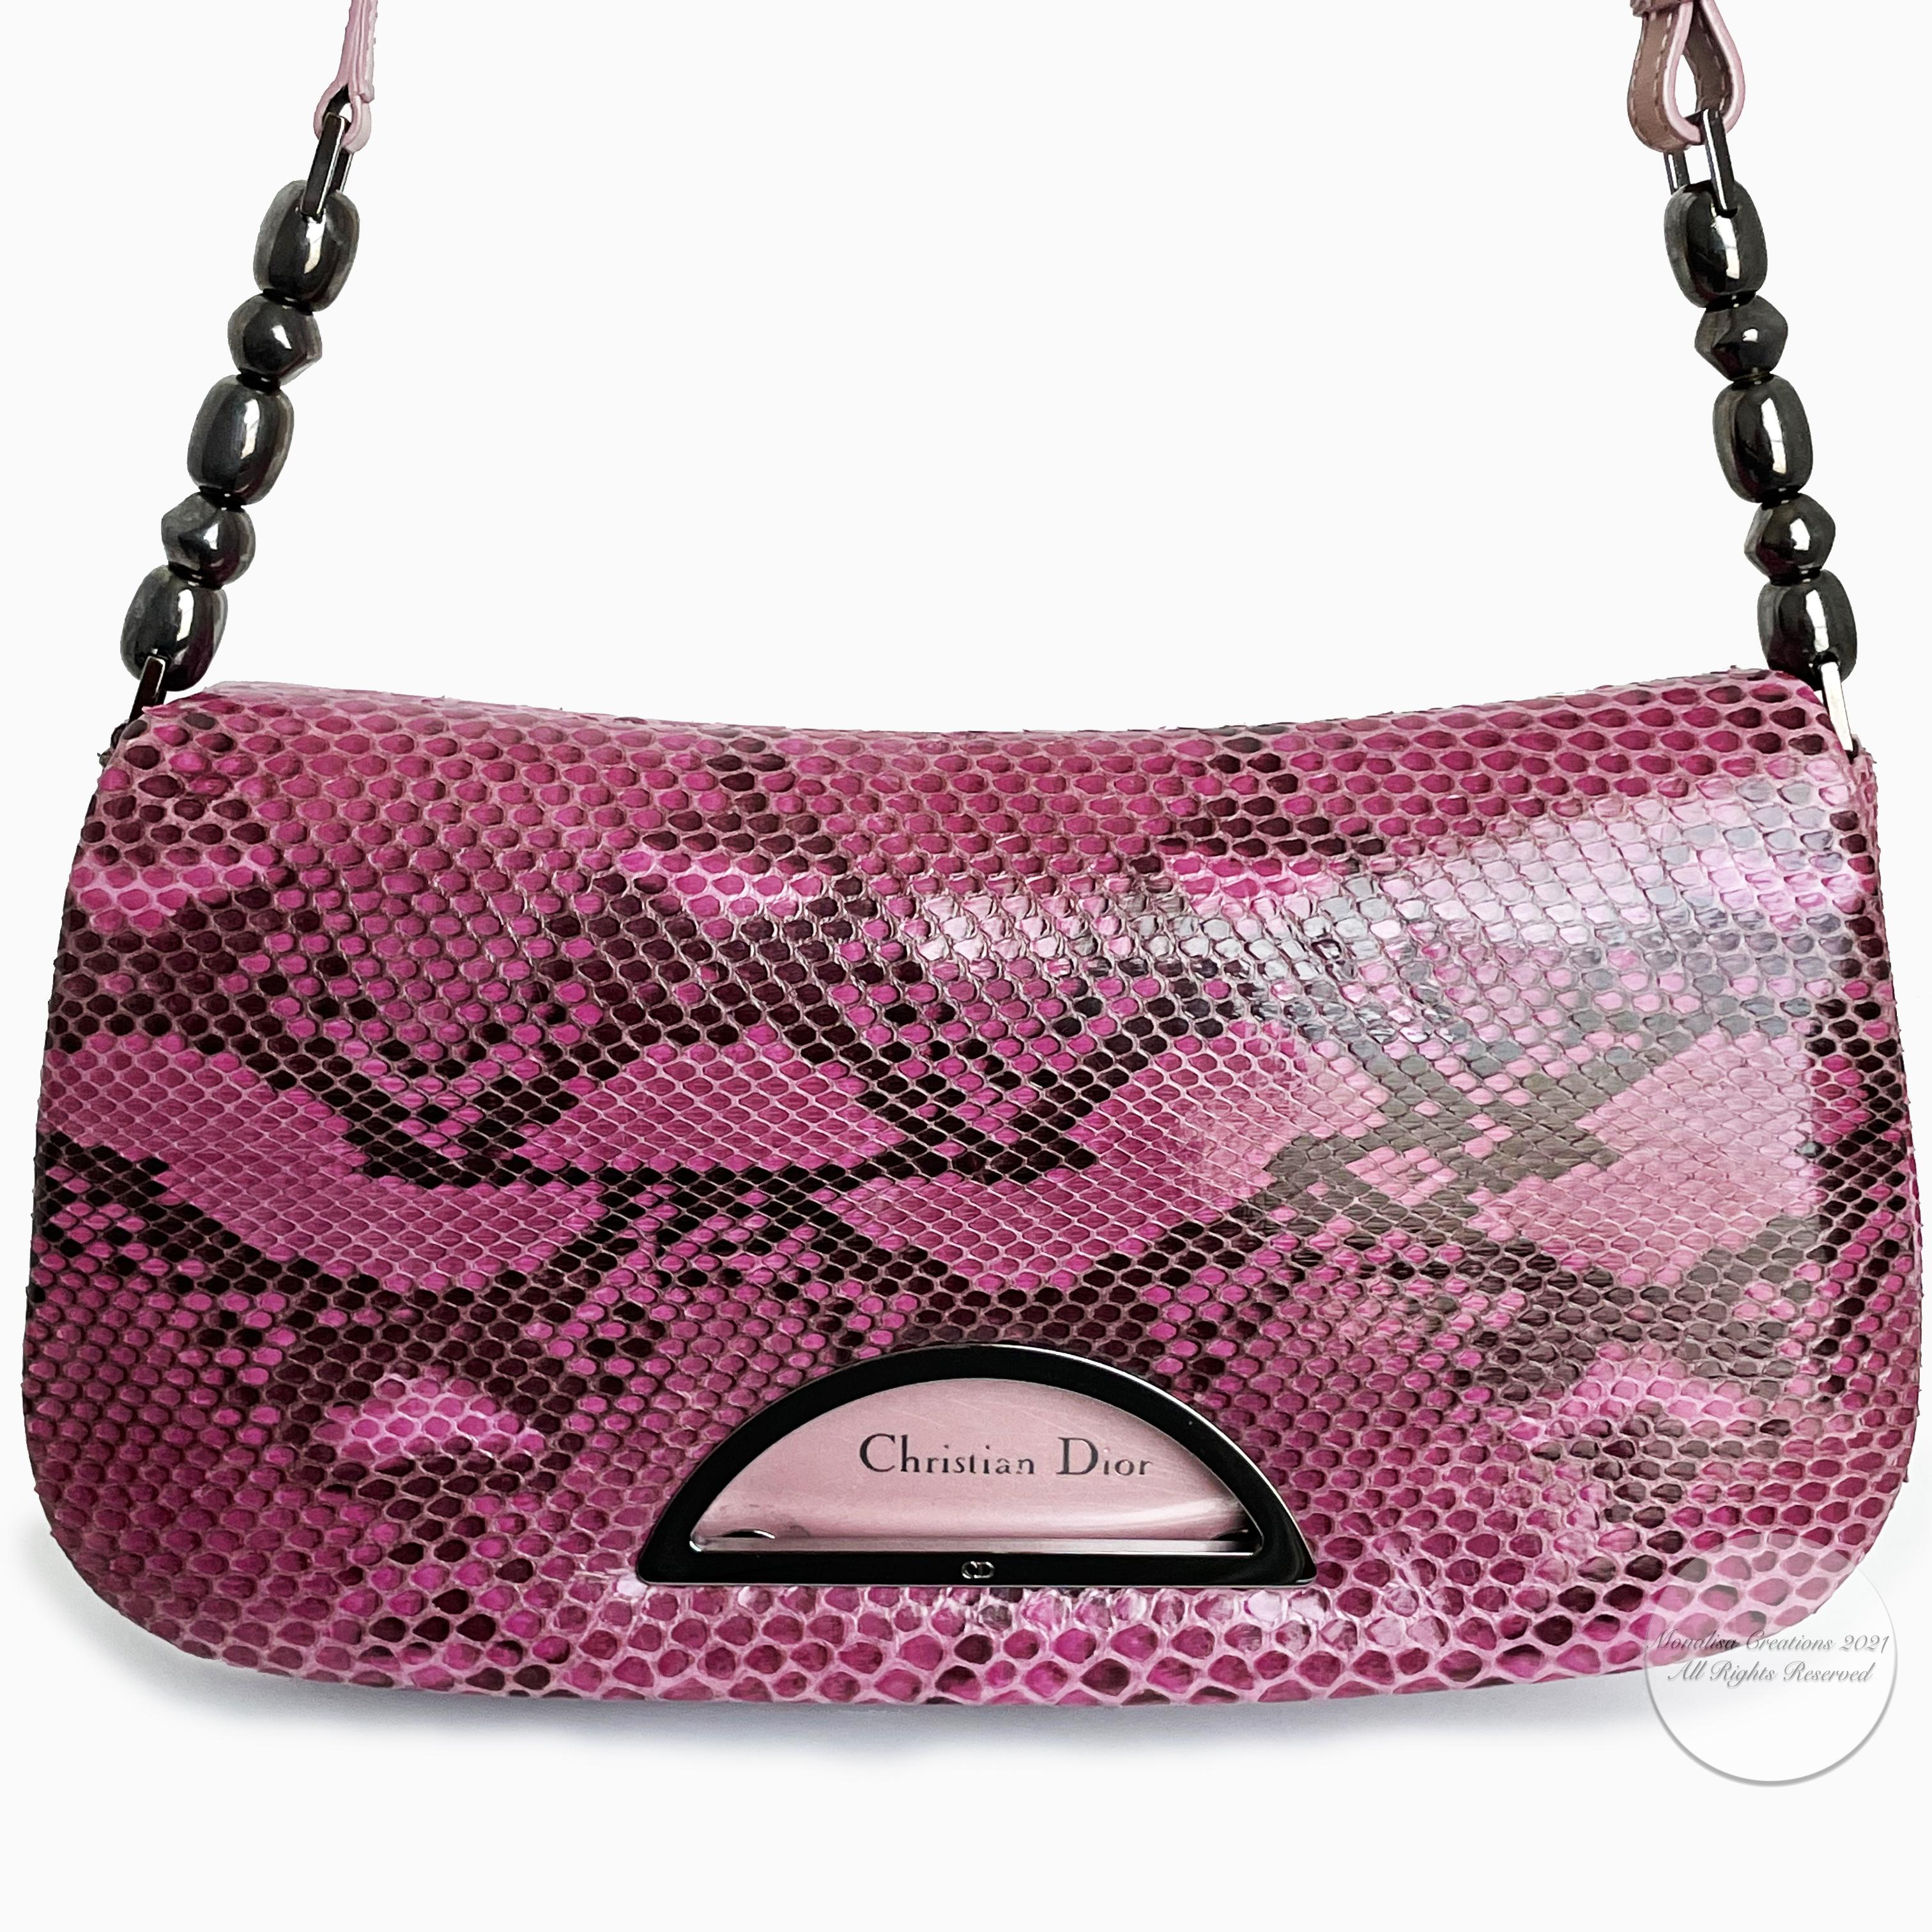 Authentic, preowned Christian Dior Malice flap bag in pink python and leather, likely made in the 2000s.  Made from pink exotic python and pink leather, it features silver hardware and beading detail on the shoulder strap.  A chic little bag in a